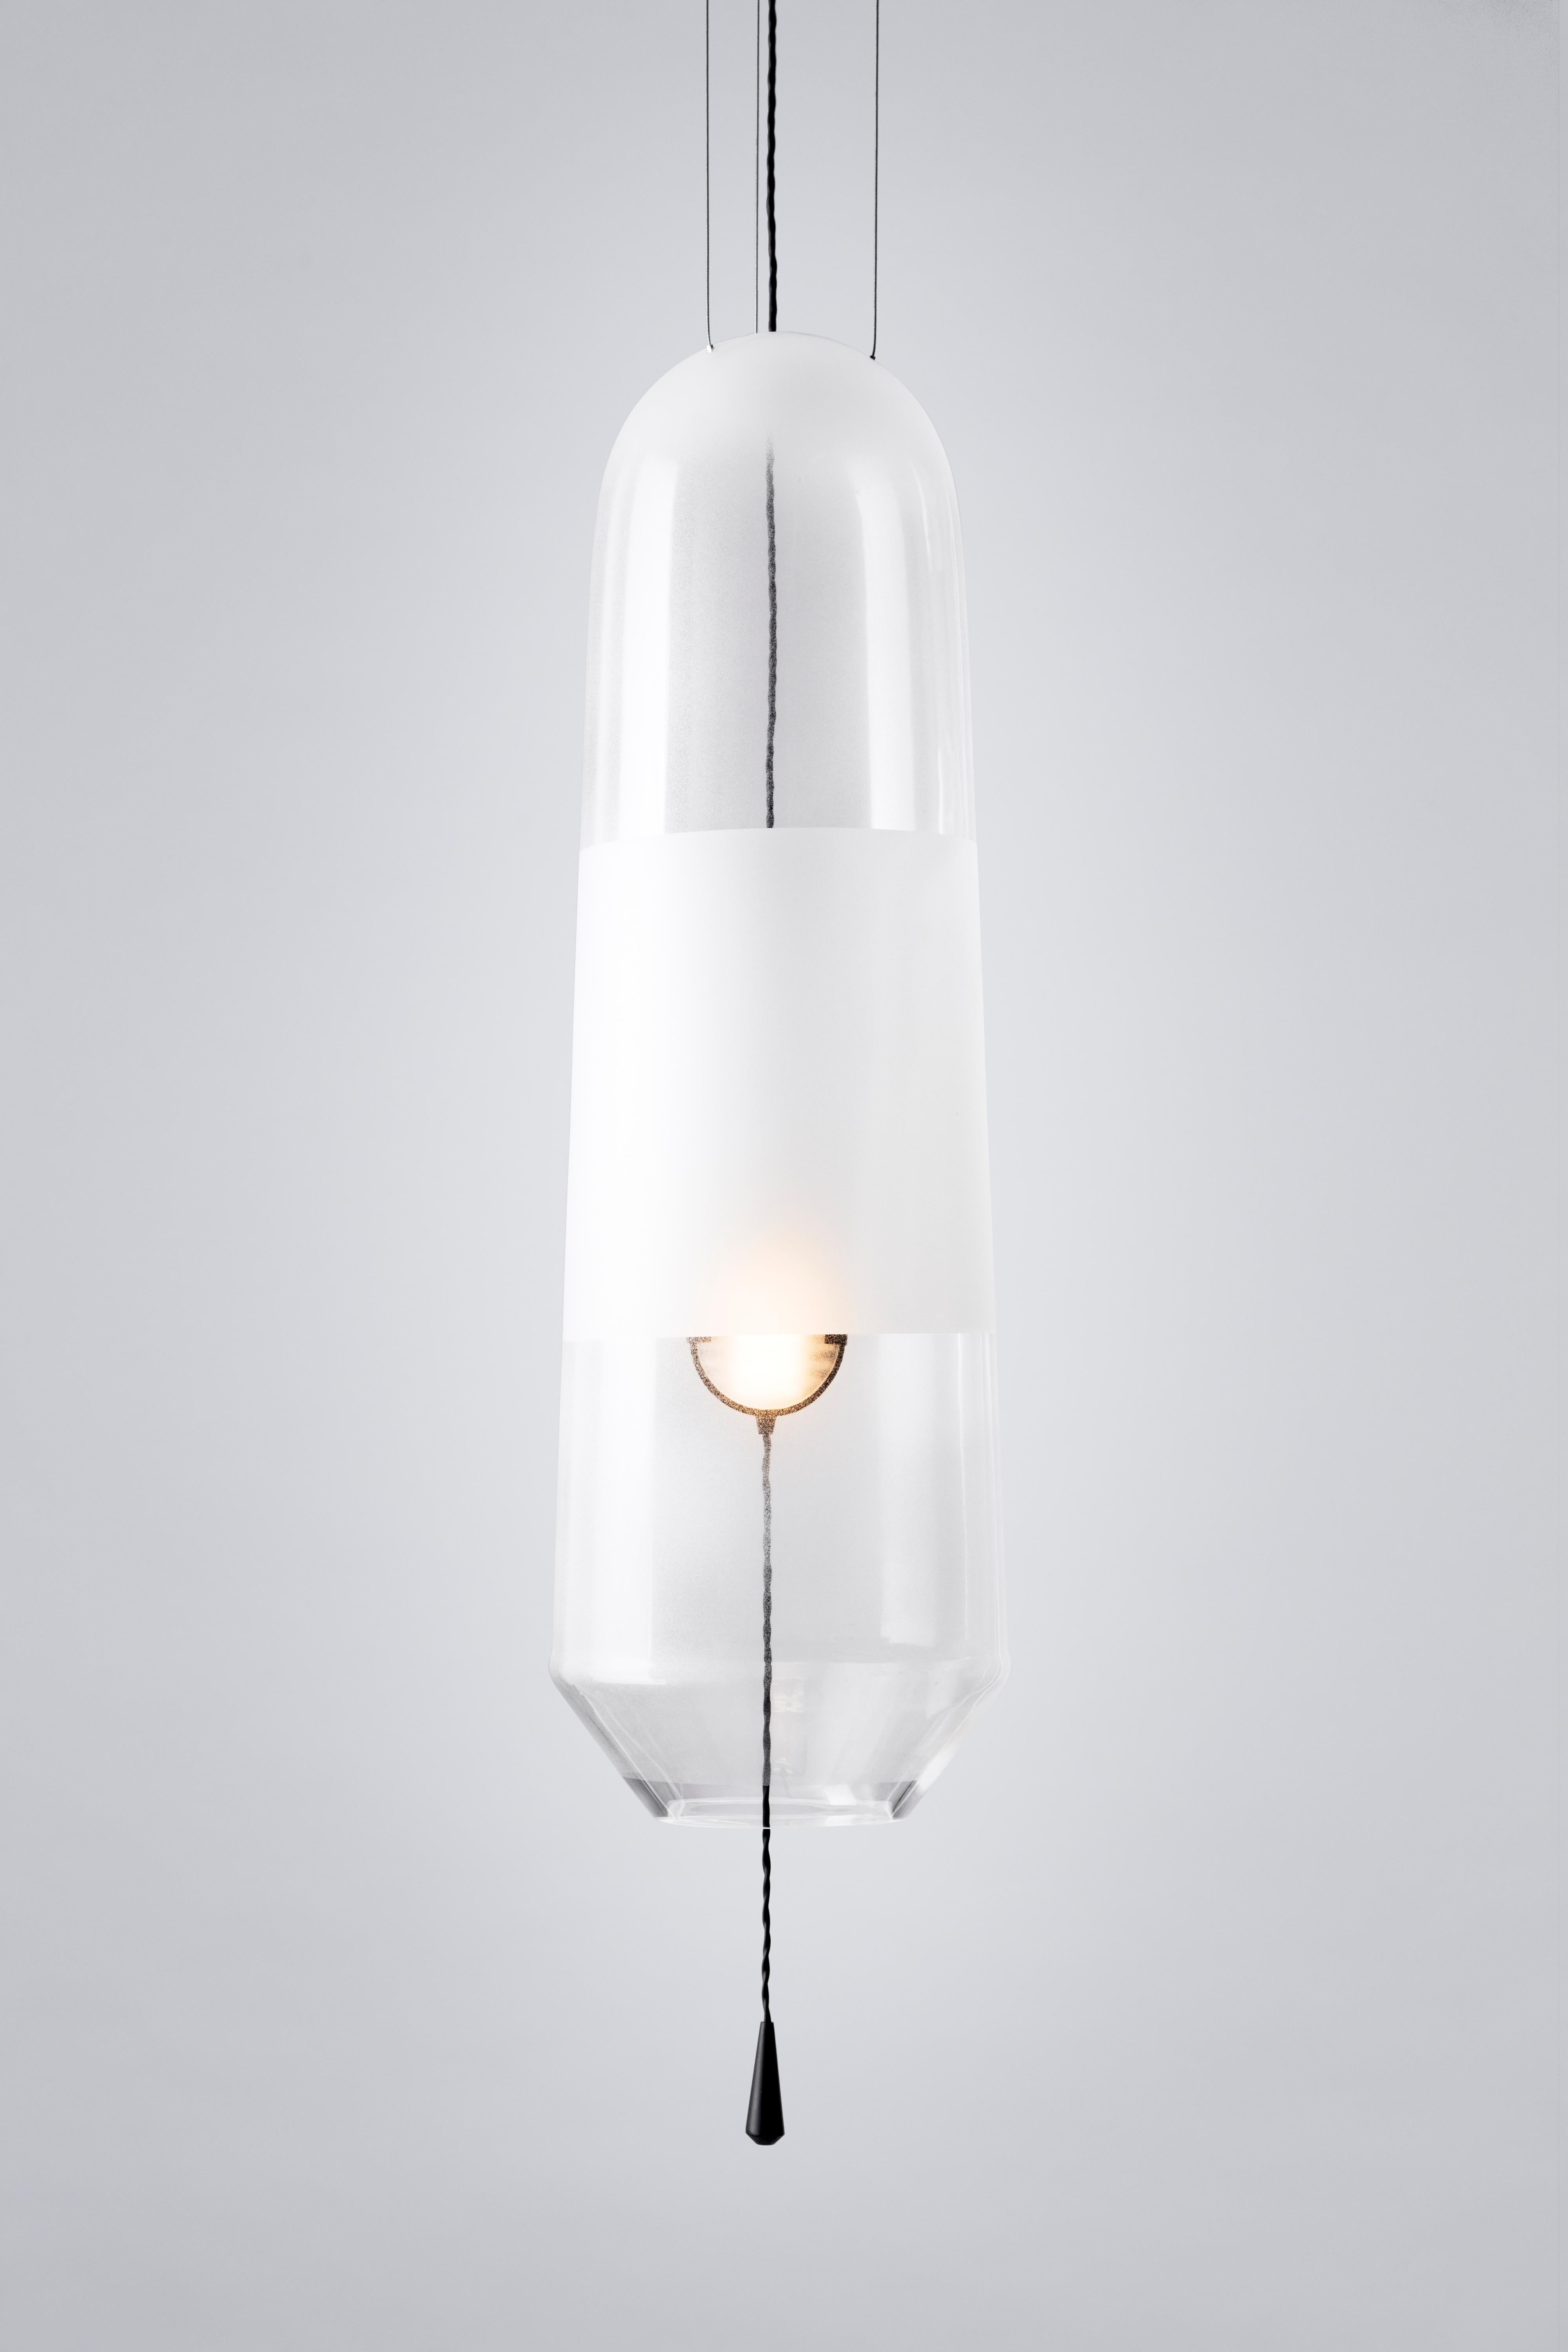 Our limpid light size L in shade “Clear” is a pendant light, decorative light made in Europe.
The Limpid Lights collection, a series of lighting objects that incorporate movement as a key element of its design.
By moving the light source away from,